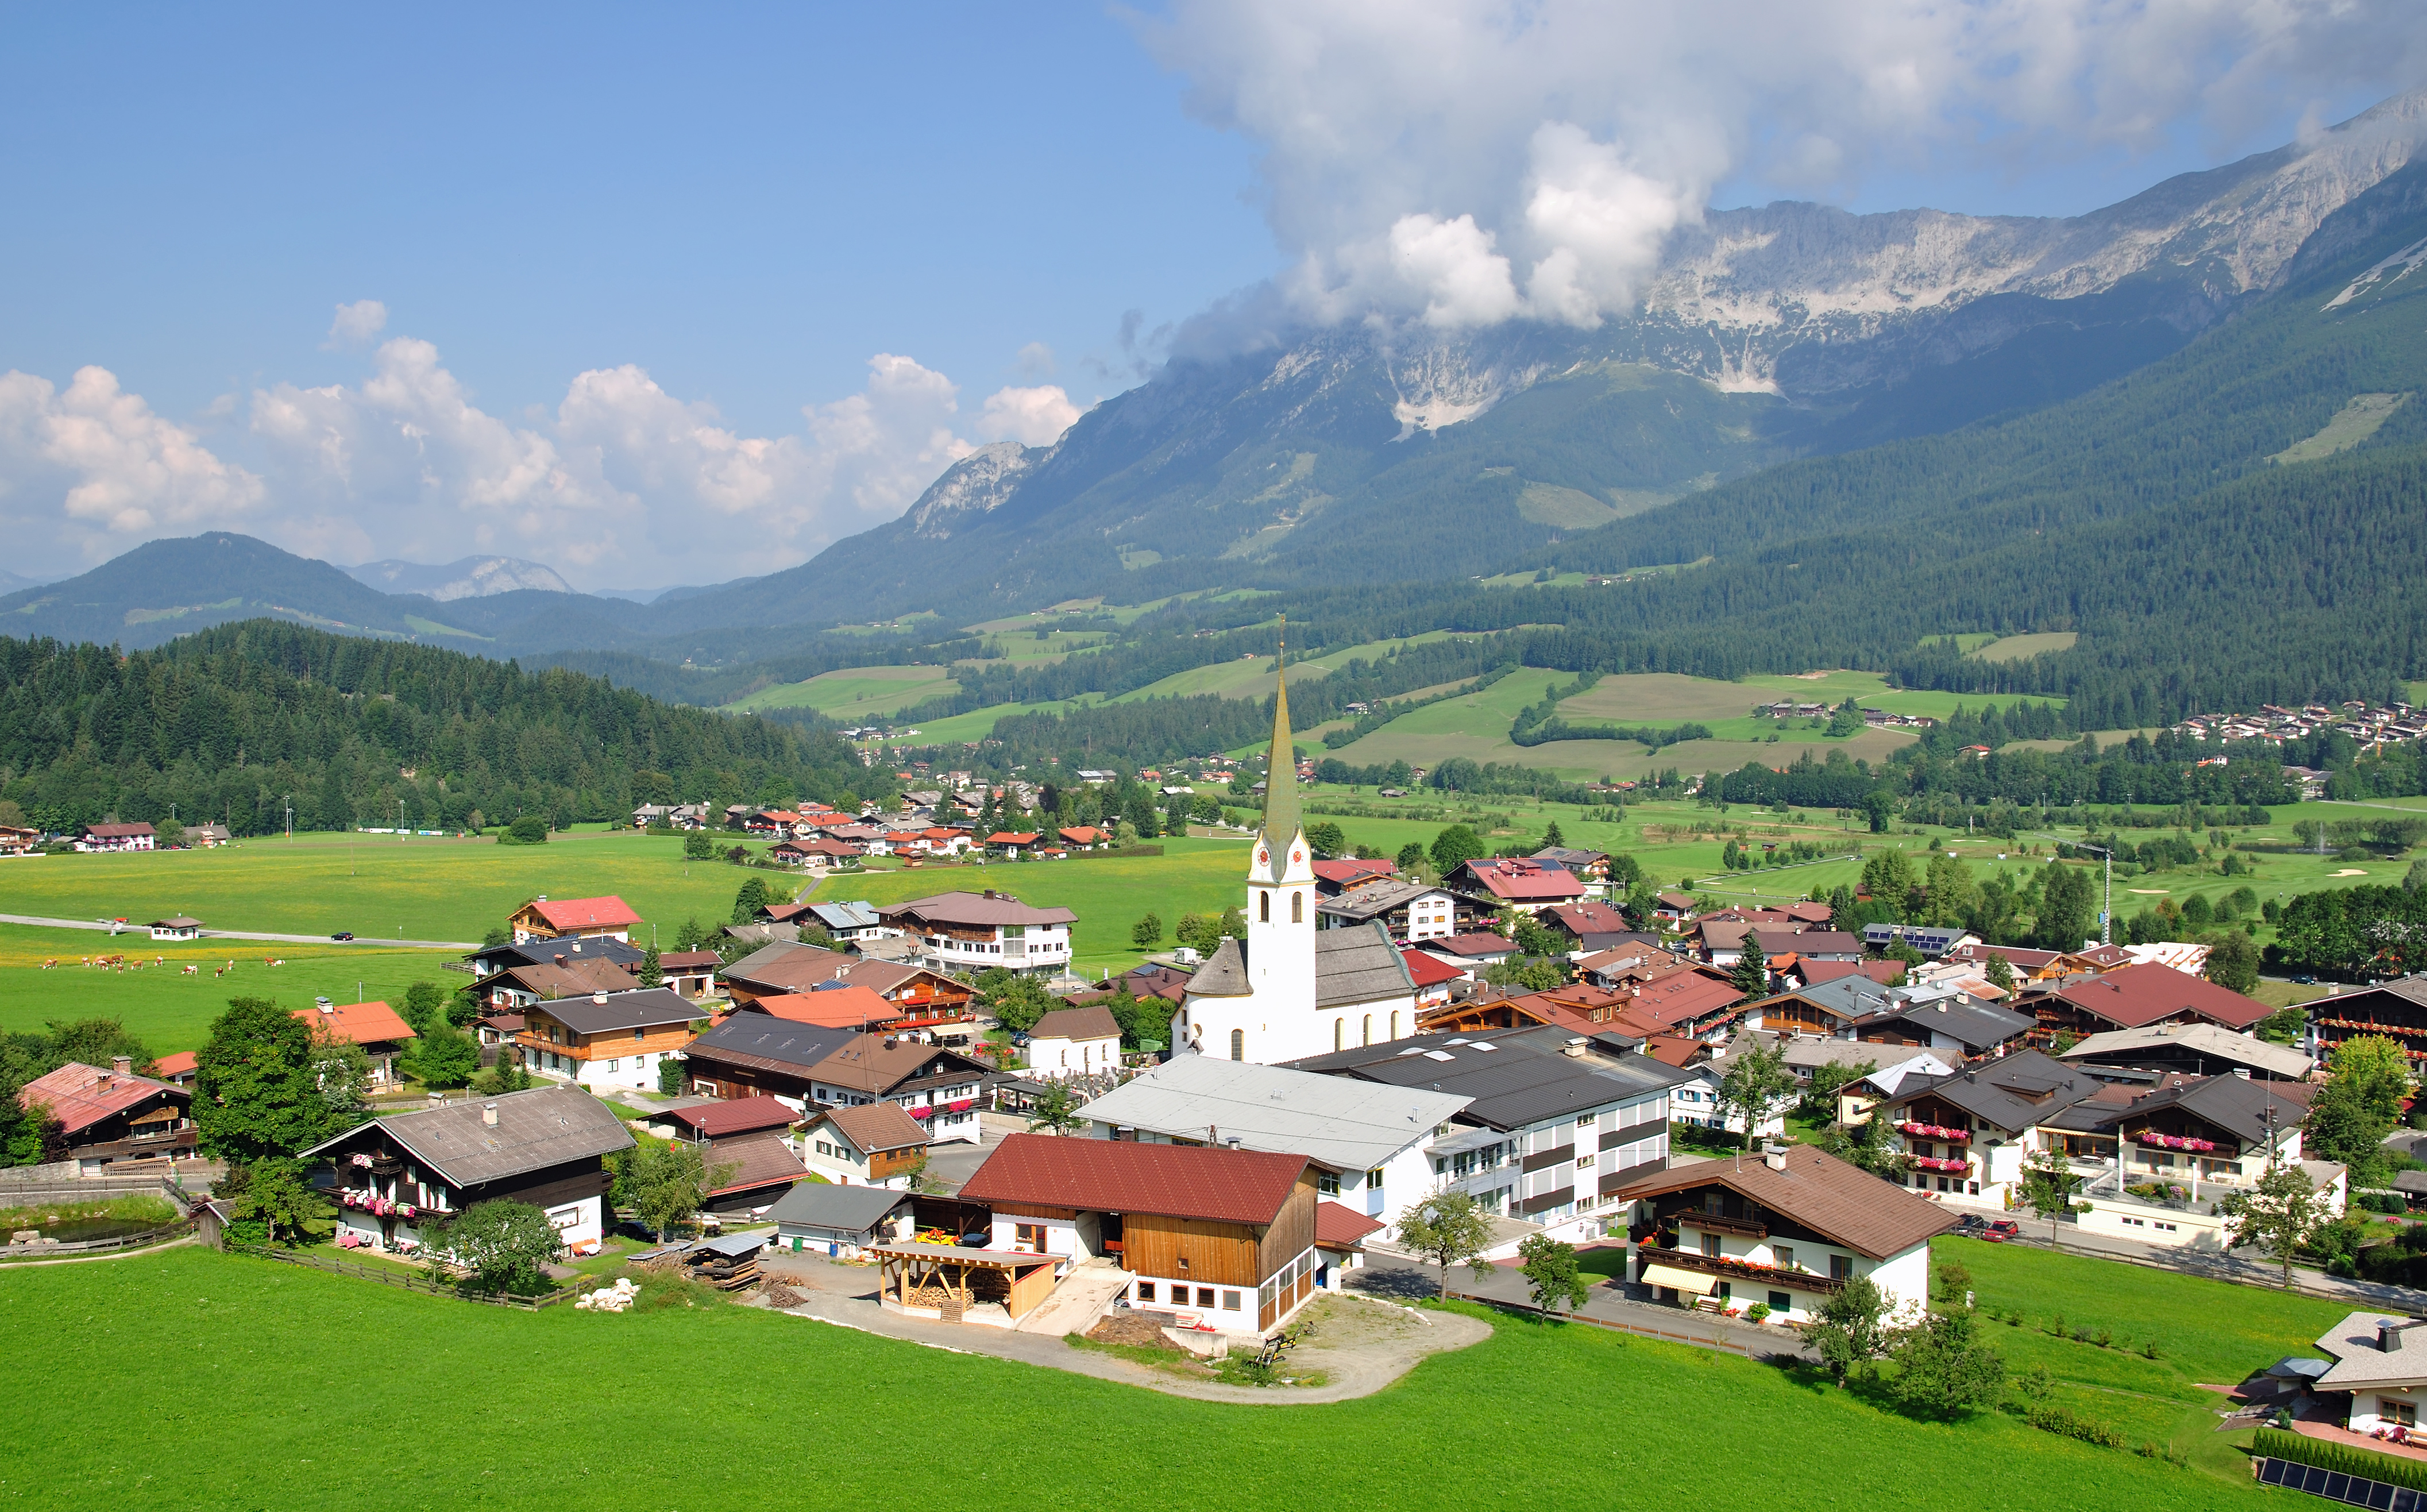 How To Get From Munich Airport To Kitzbuhel